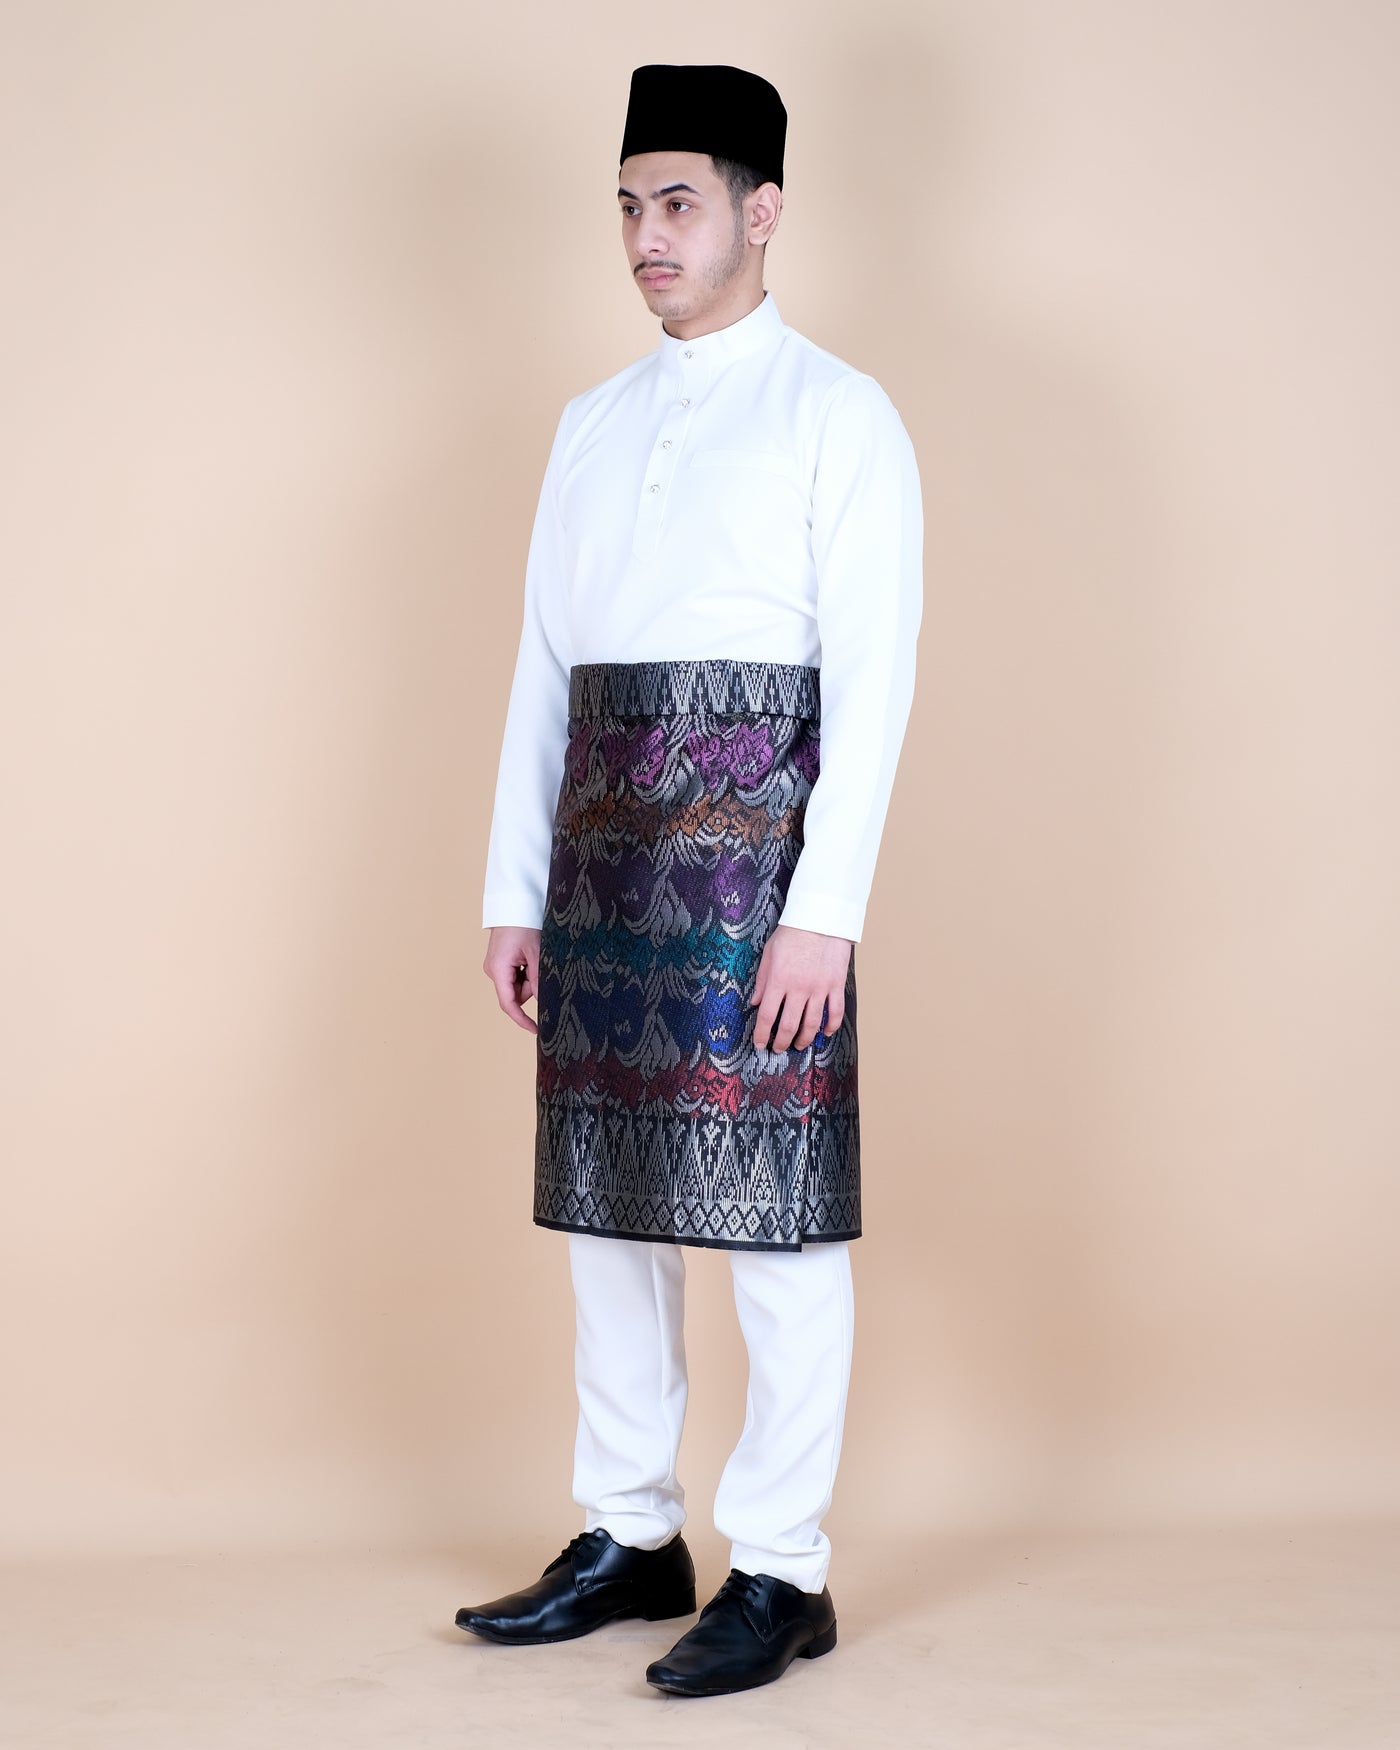 Songket Instant - Black Silver (SI 39)